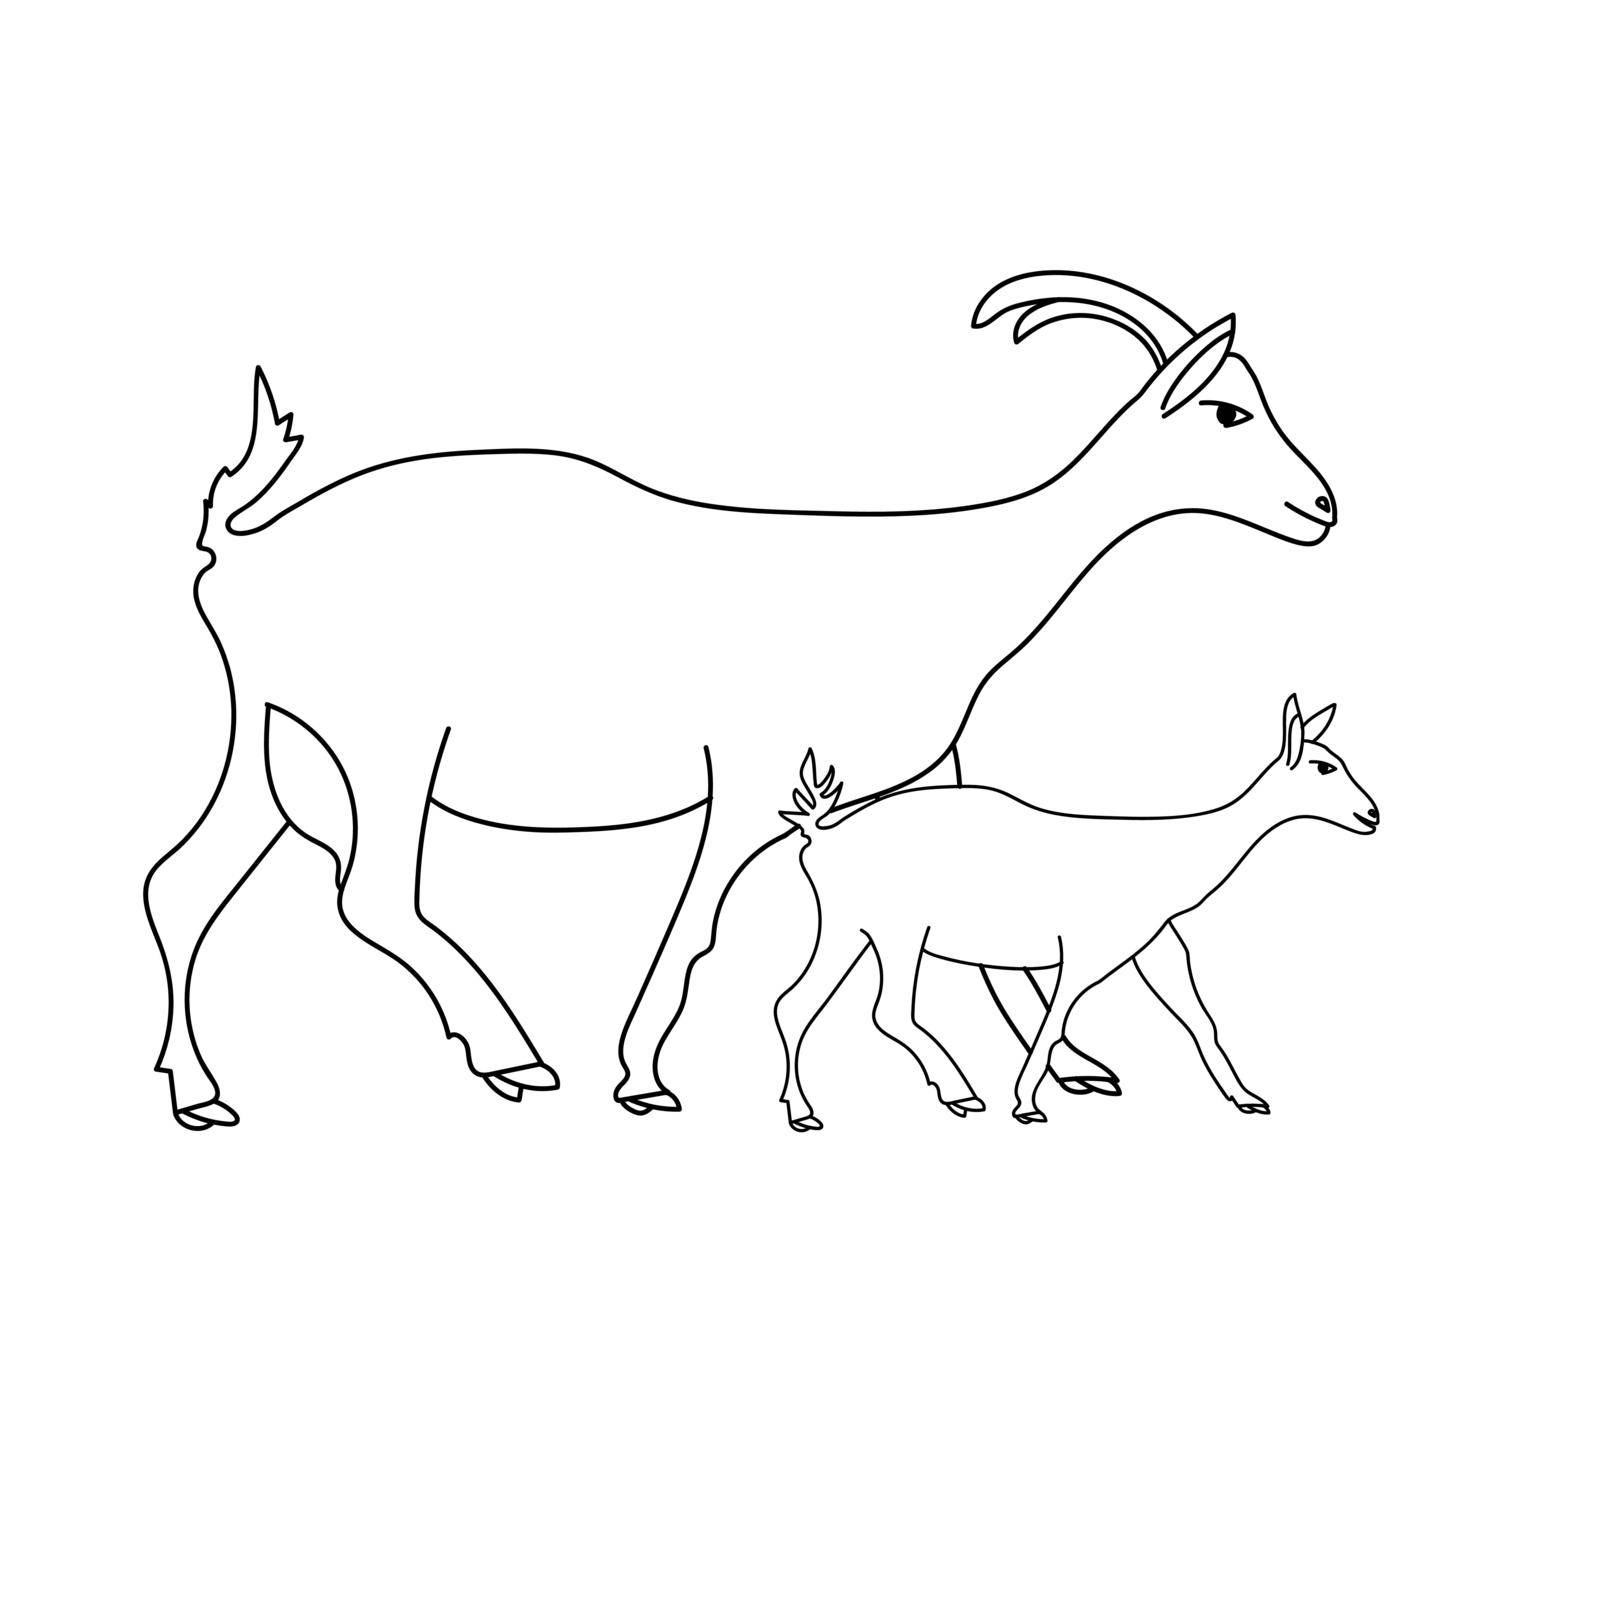 Goat and kid, mom and baby animals, coloring book page for children learning, pets vector outline illustration for design and creativity